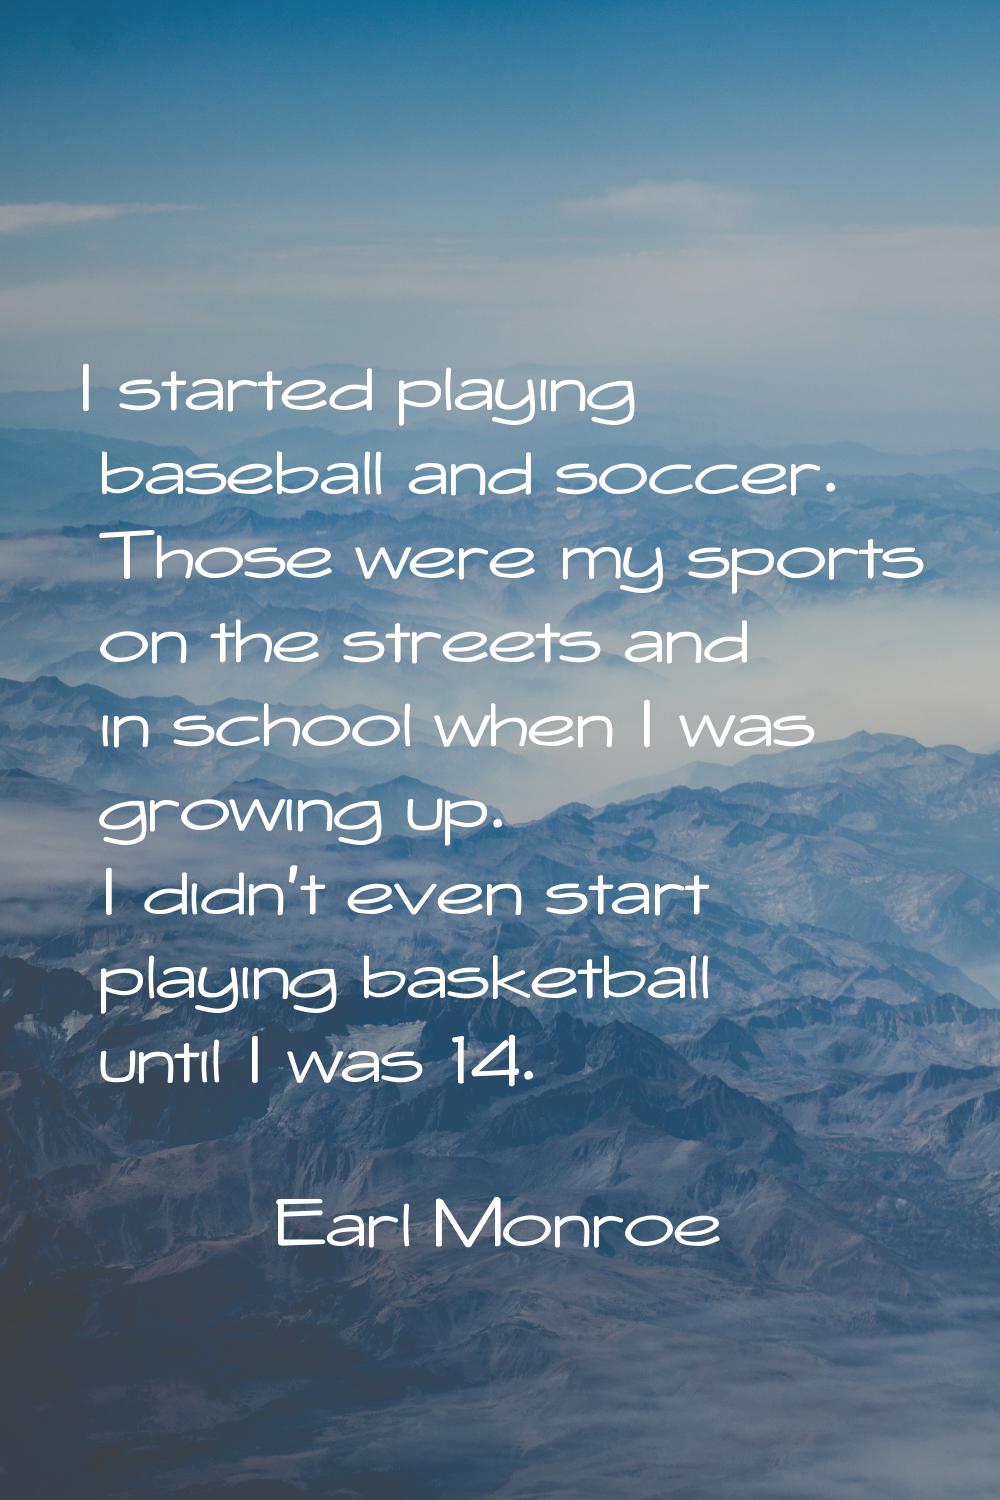 I started playing baseball and soccer. Those were my sports on the streets and in school when I was